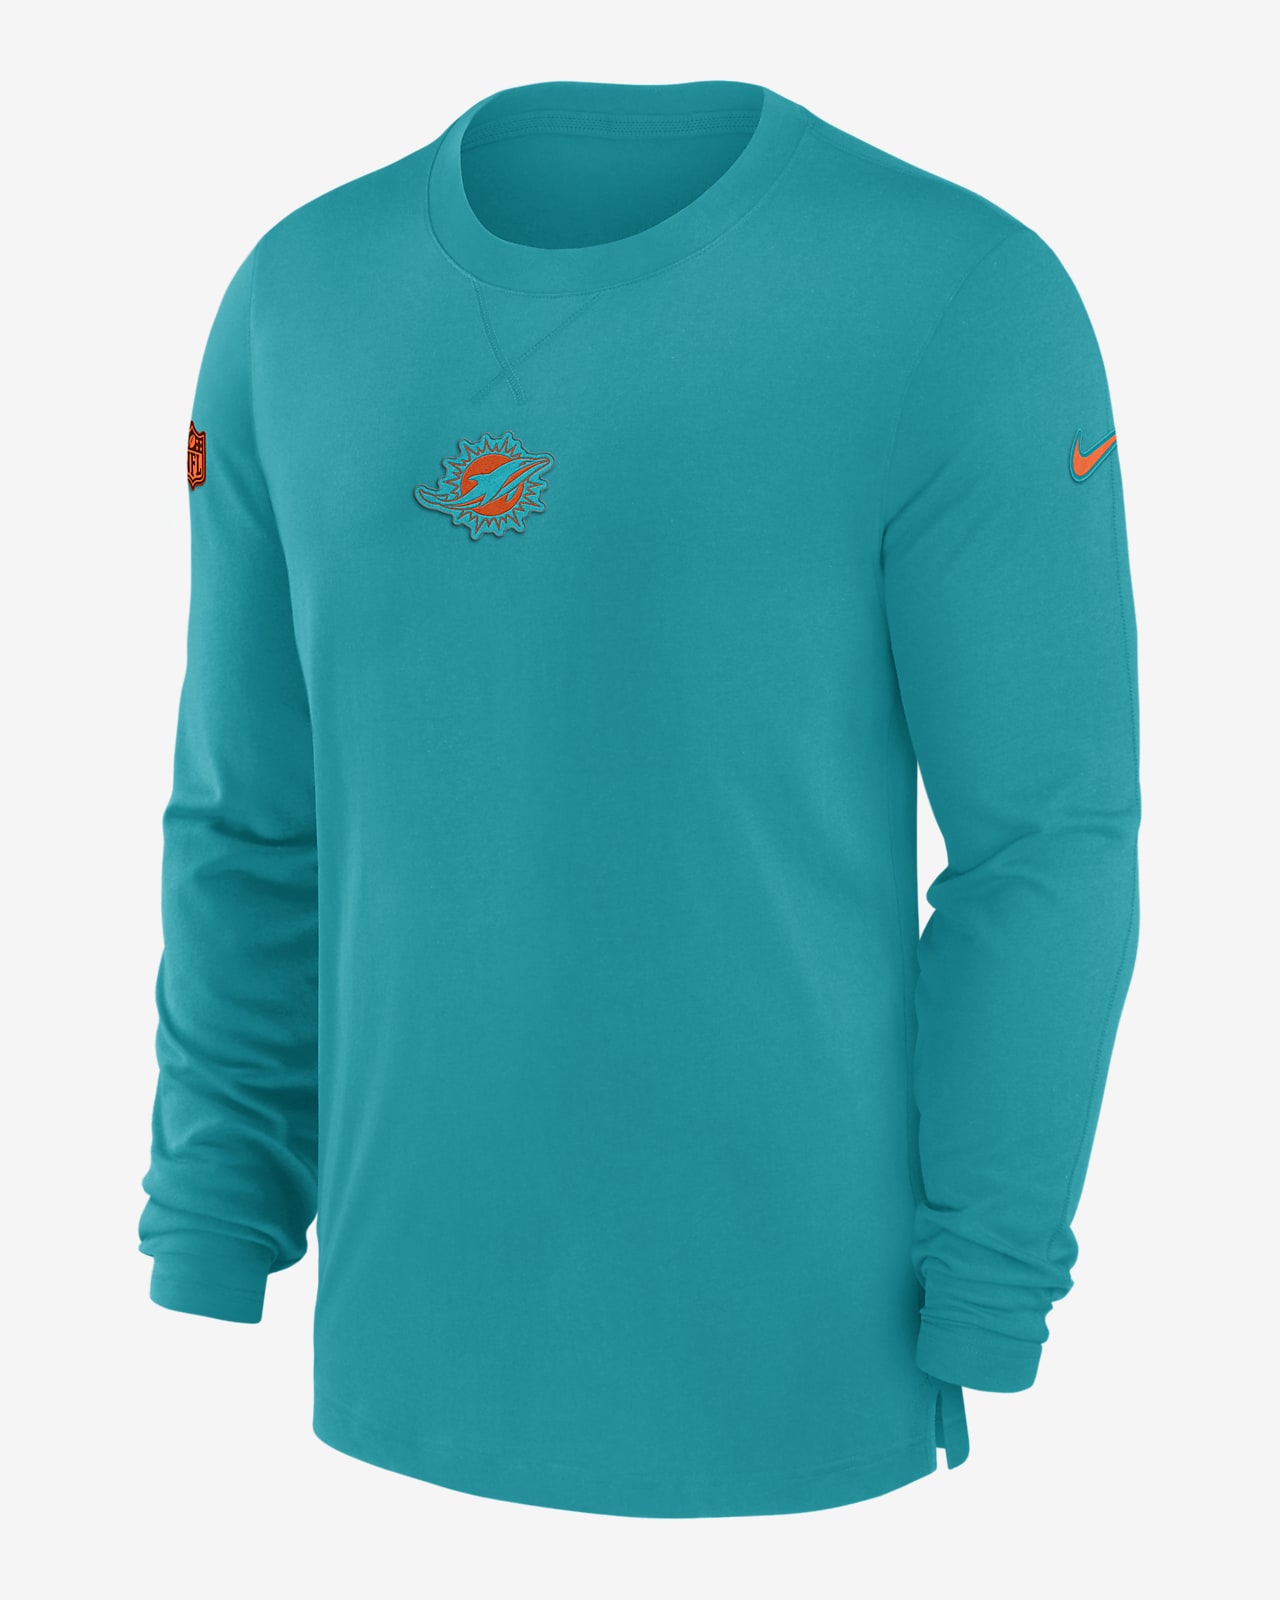 dolphins nike